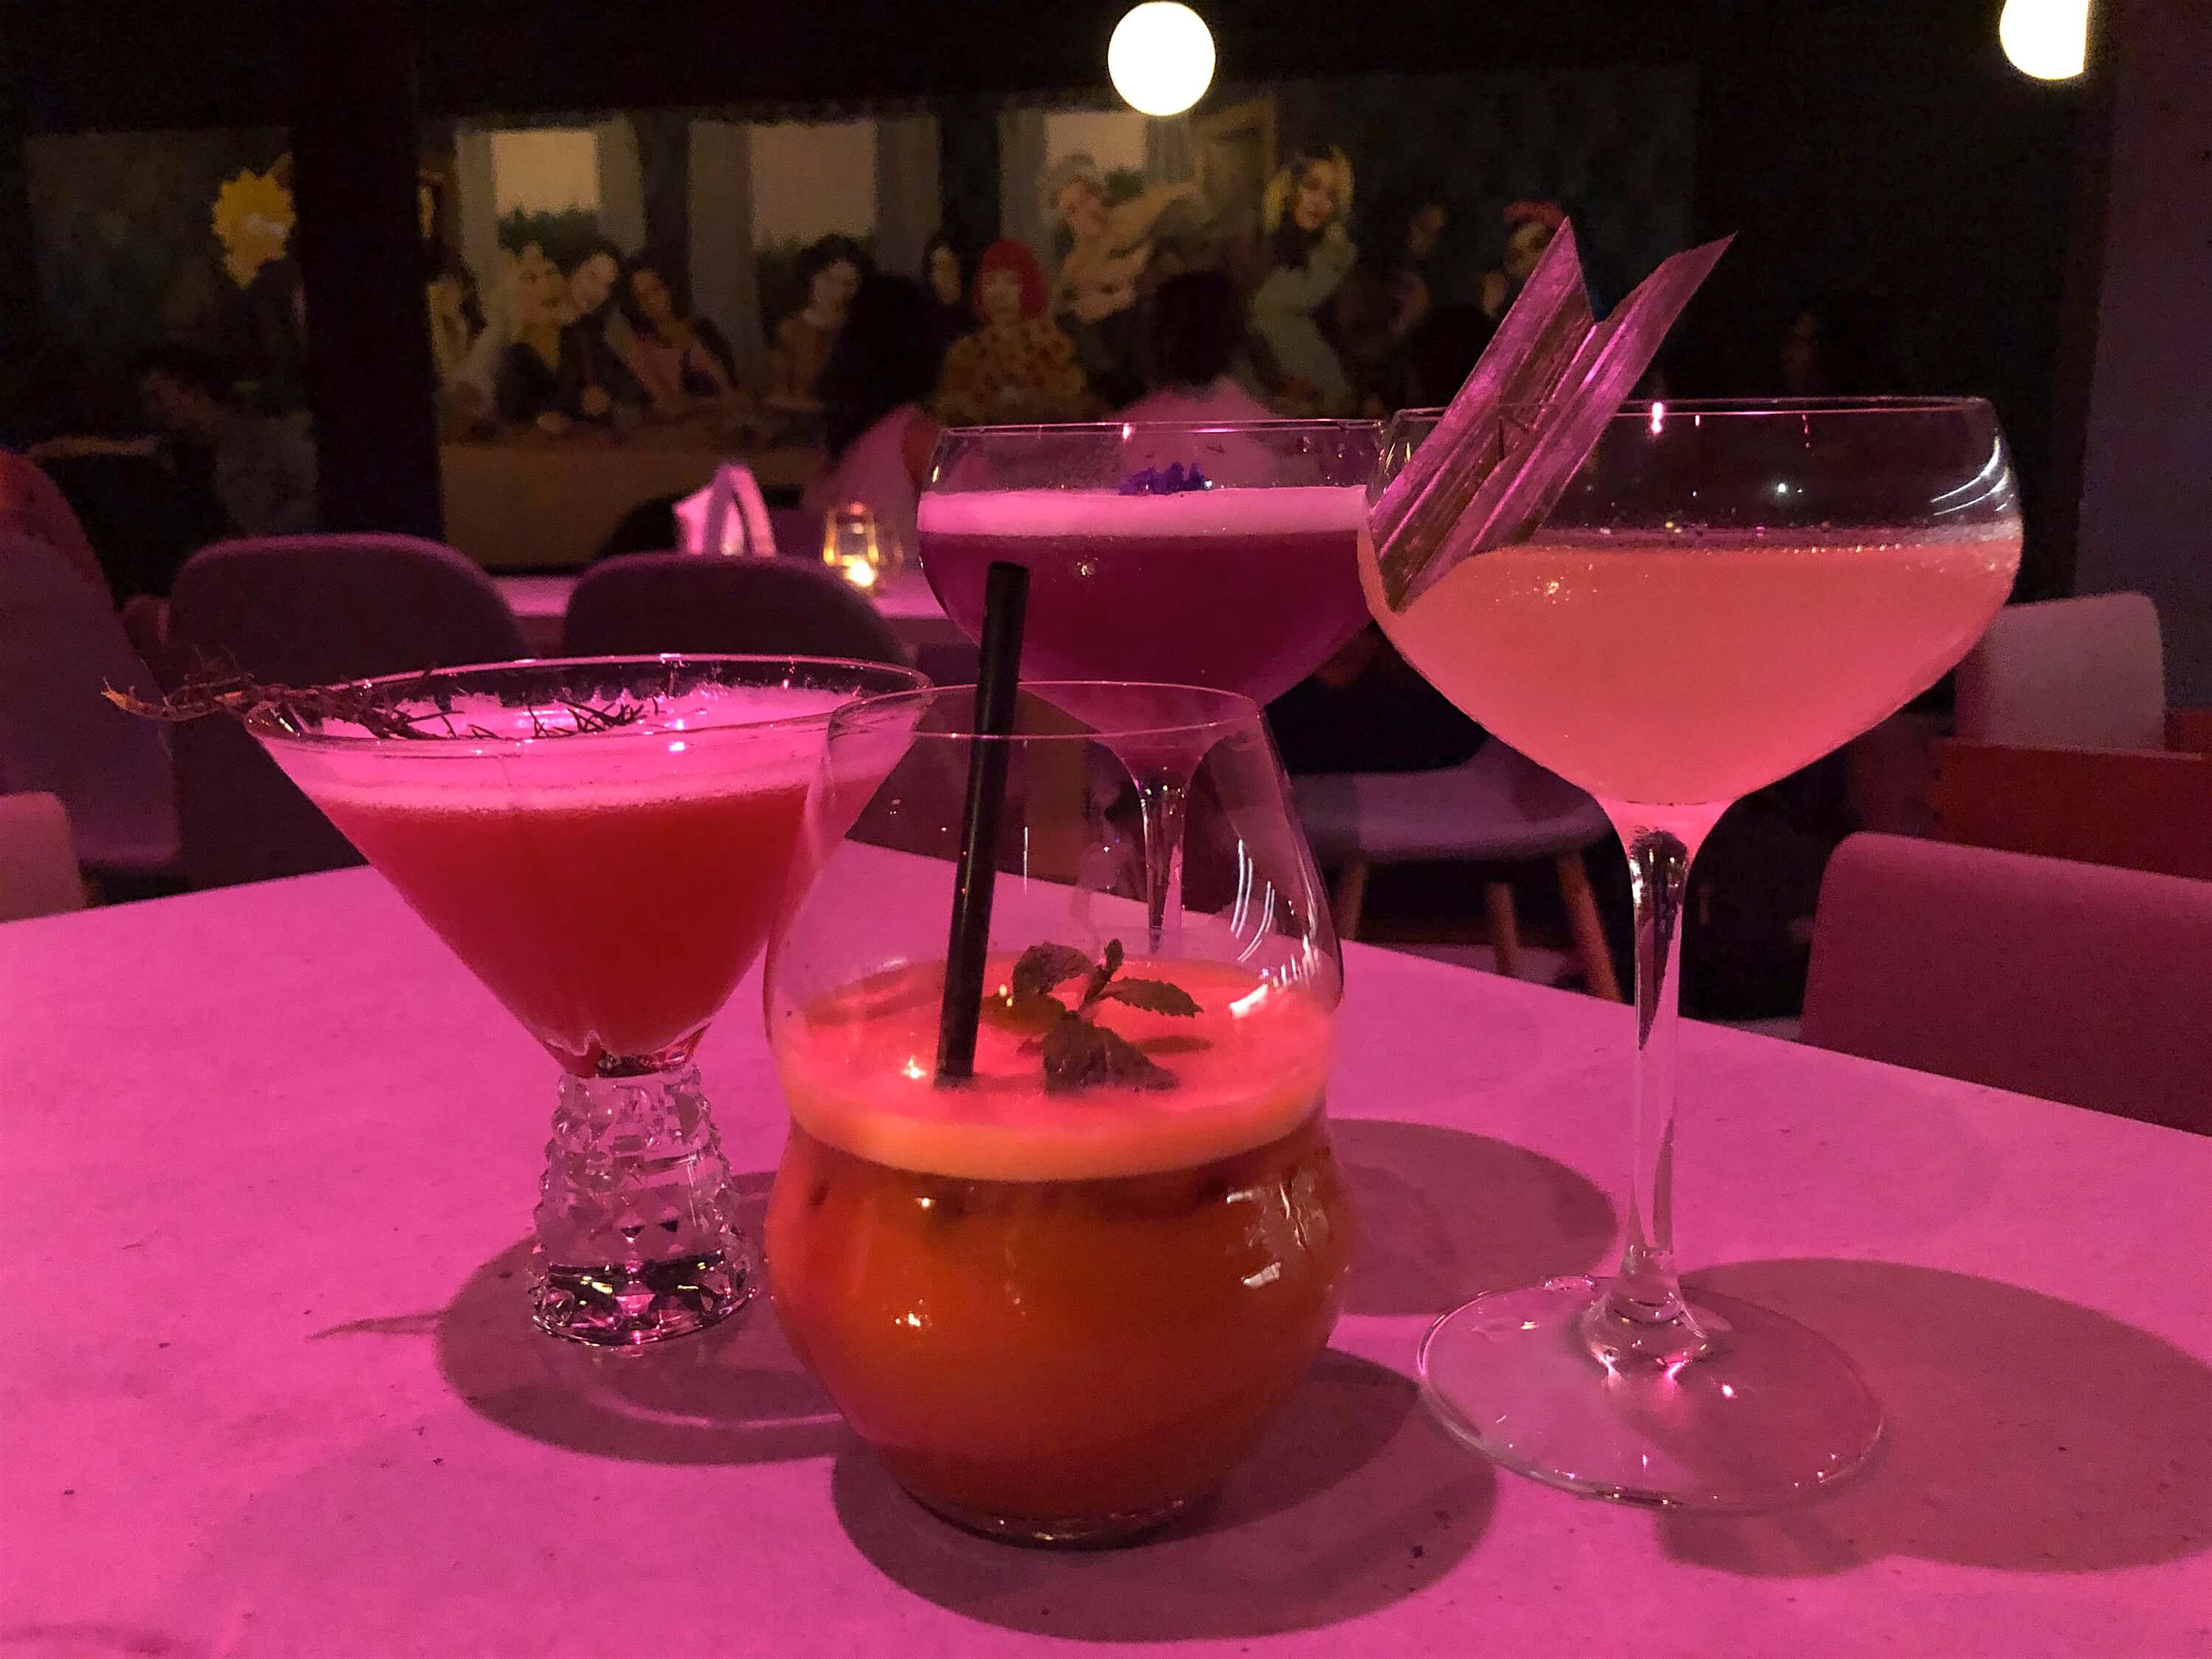 Some of Bar Gina’s signature craft cocktails, from left to right: Redhead Gypsy, Bangkok Dangerous (in the front), Lady Boss (in the back), and Between Moods. Photo: Nadia Vetta Hamid/Coconuts Media